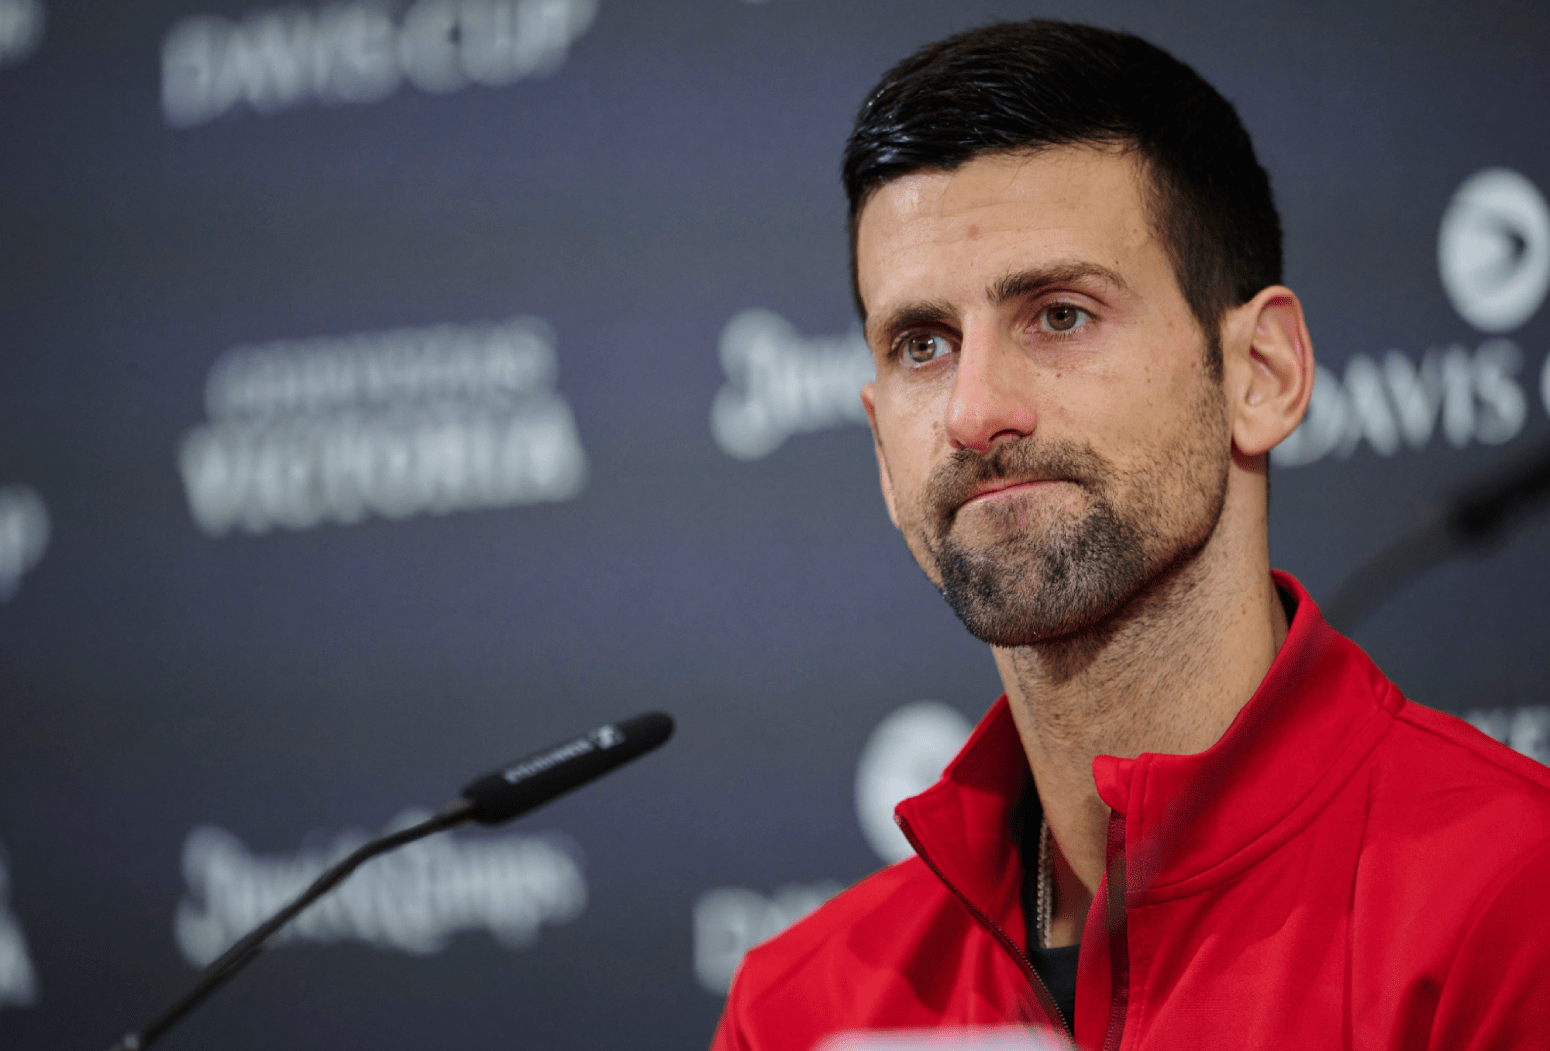 Novak Djokovic of Serbia looks on in press conference after the Semi-Final match against Jannik Sinner and Lorenzo Sonego of Italy in Davis Cup Final at Palacio de Deportes Jose Maria Martin Carpena on November 25, 2023 in Malaga, Spain. (Photo by Francisco Macia/Quality Sport Images/Getty Images)